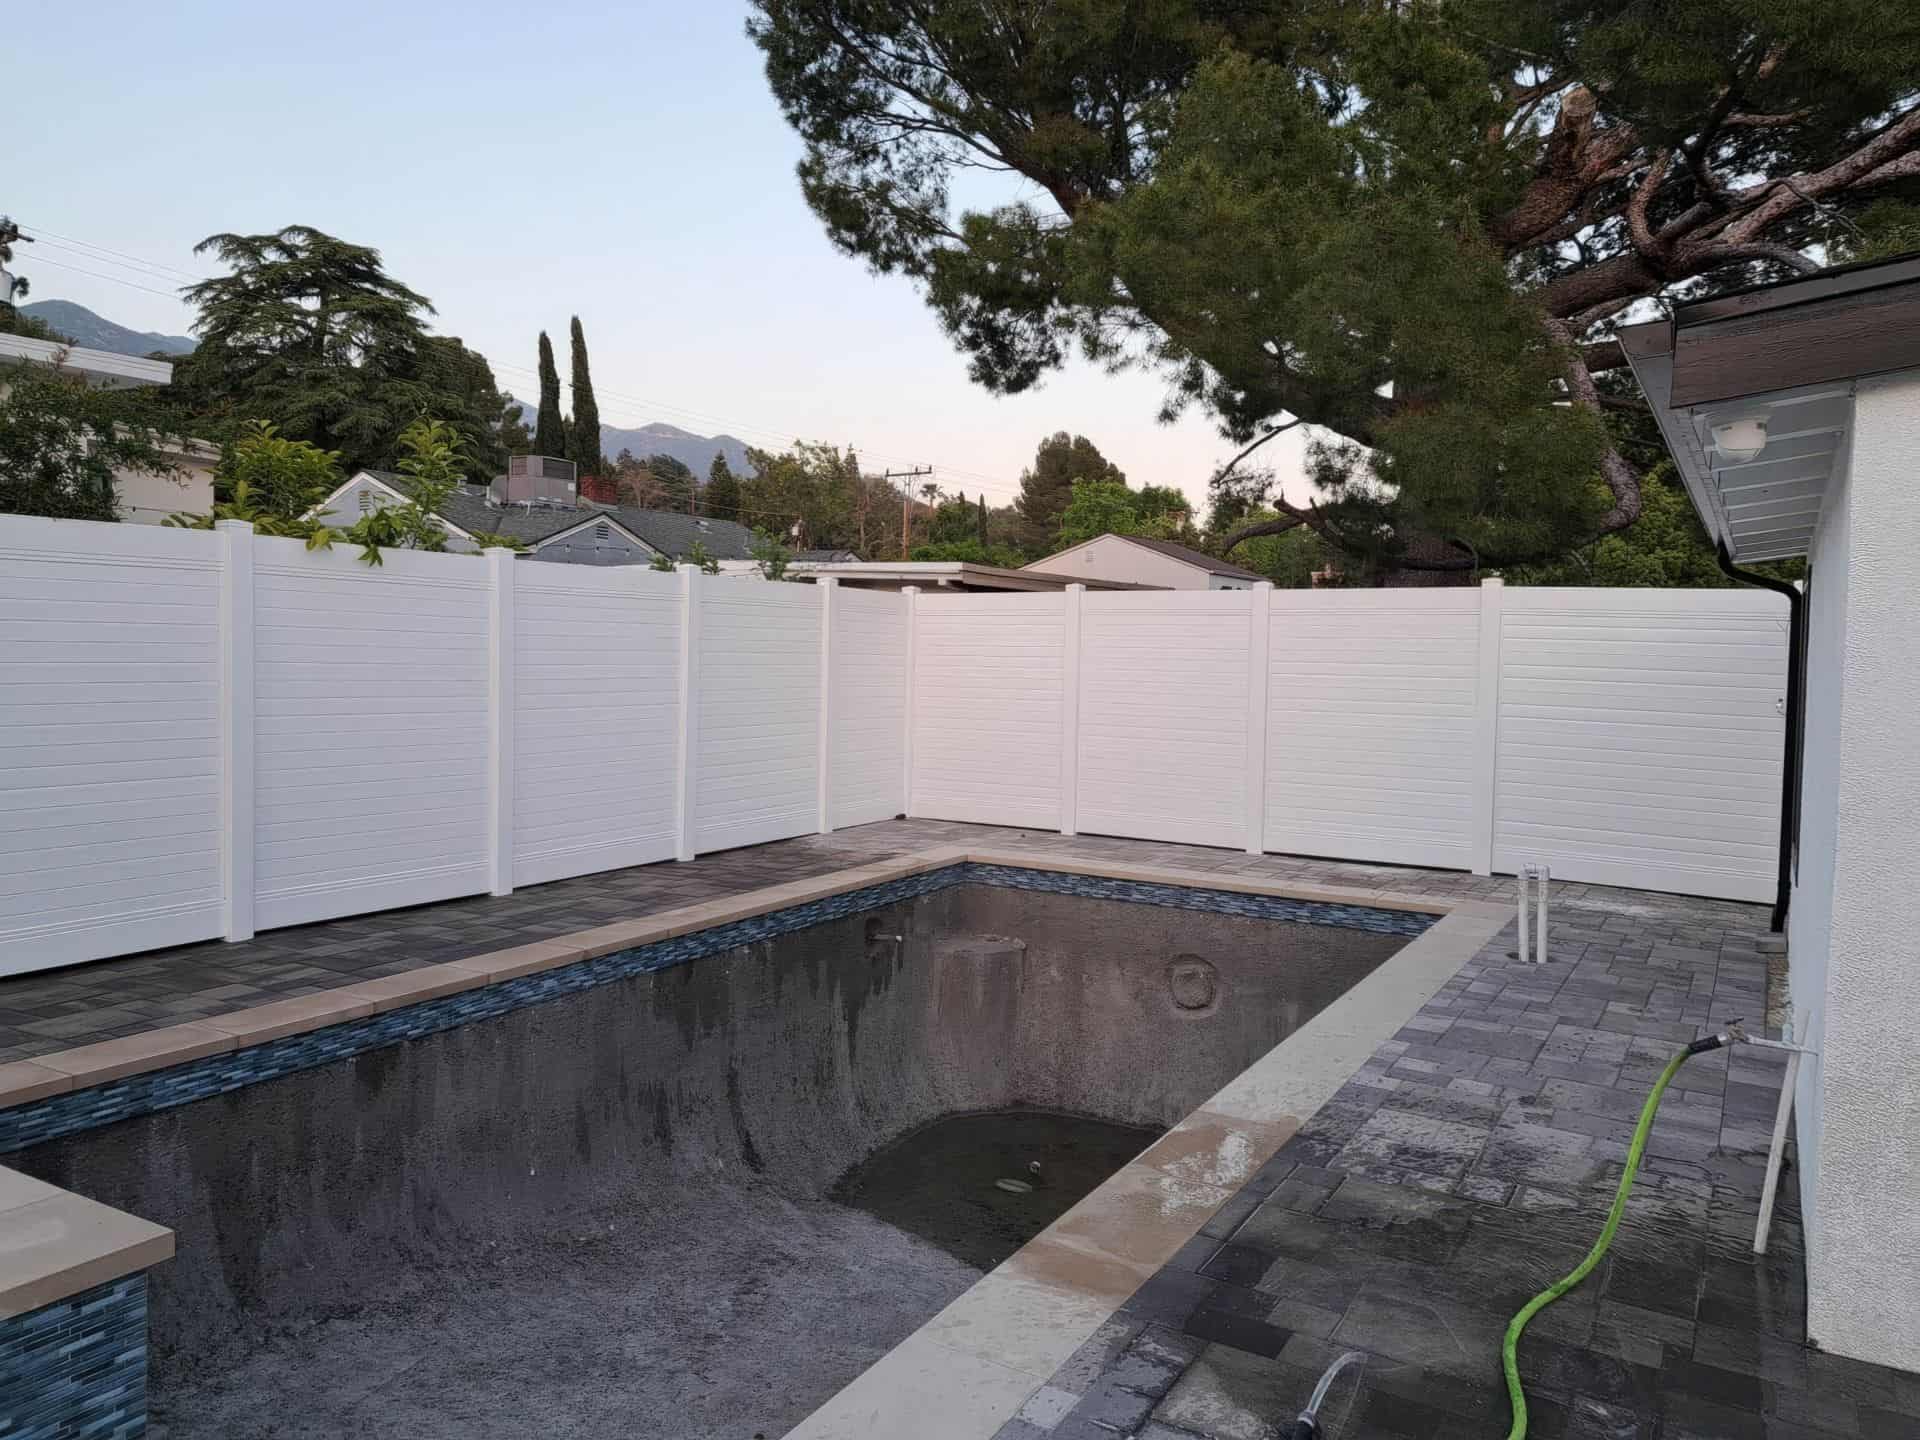 Vinyl privacy horizontal fence creating boundary around swimming pool with stylized concrete flooring and trees in the background.